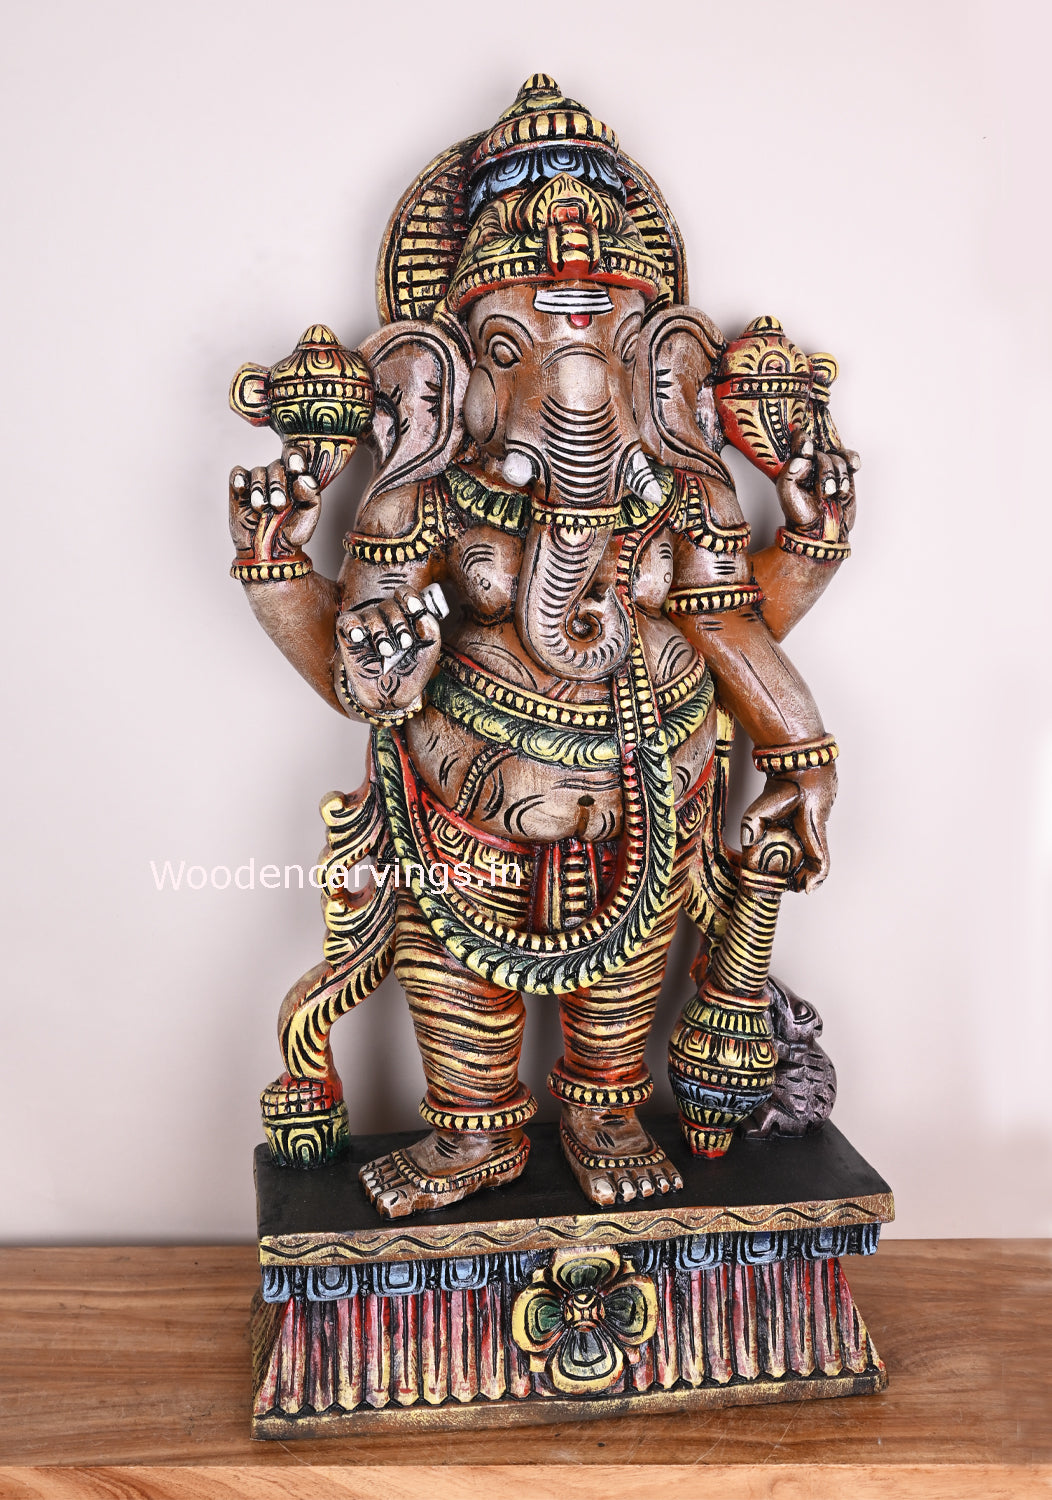 Standing Gadayuth Ganapathi Destroy Bad Evils Coloured Wooden Vaagai Wood Sculpture 37"